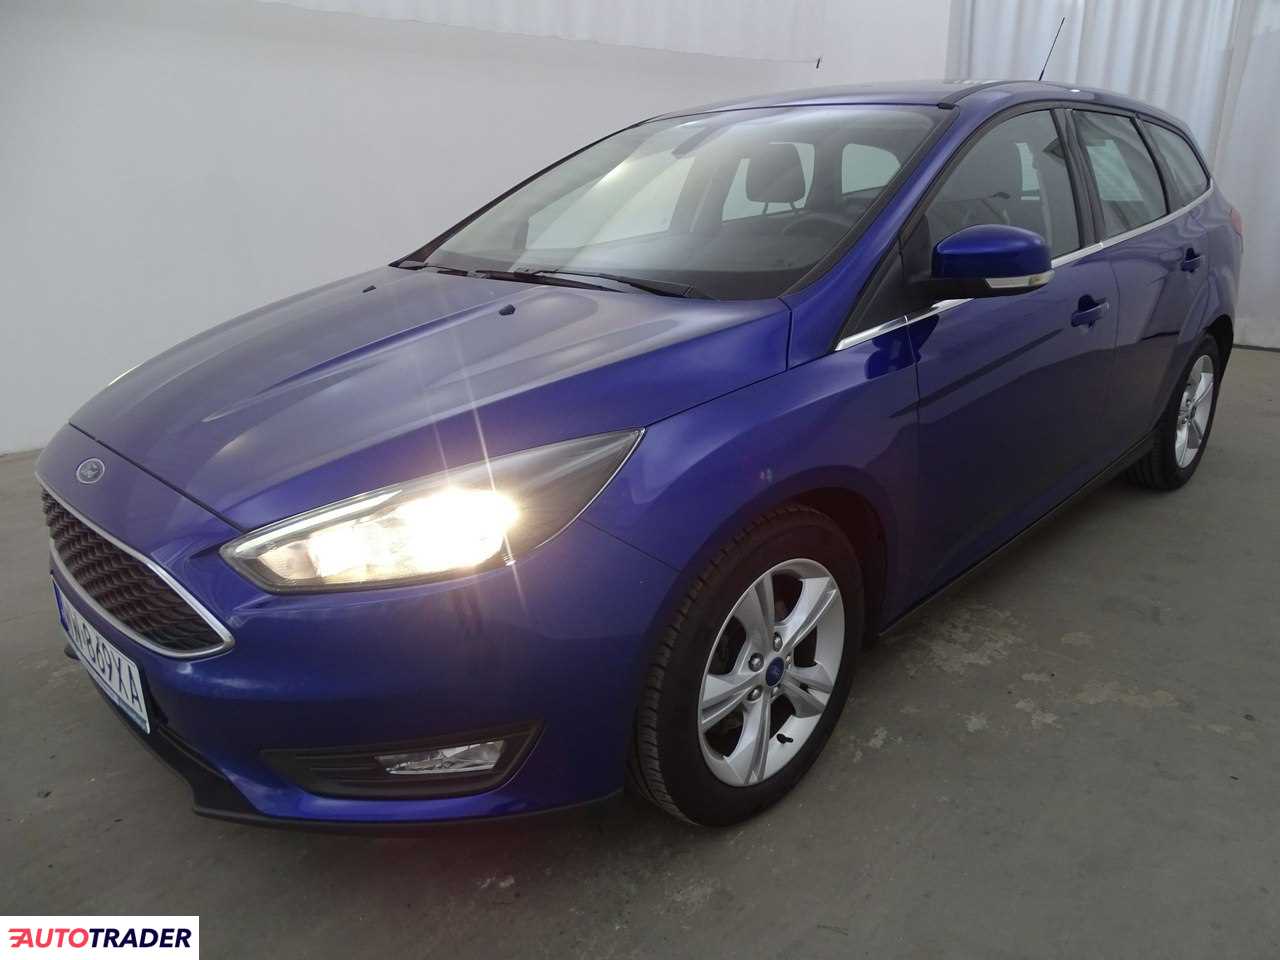 Ford Focus 2015 1.0 125 KM